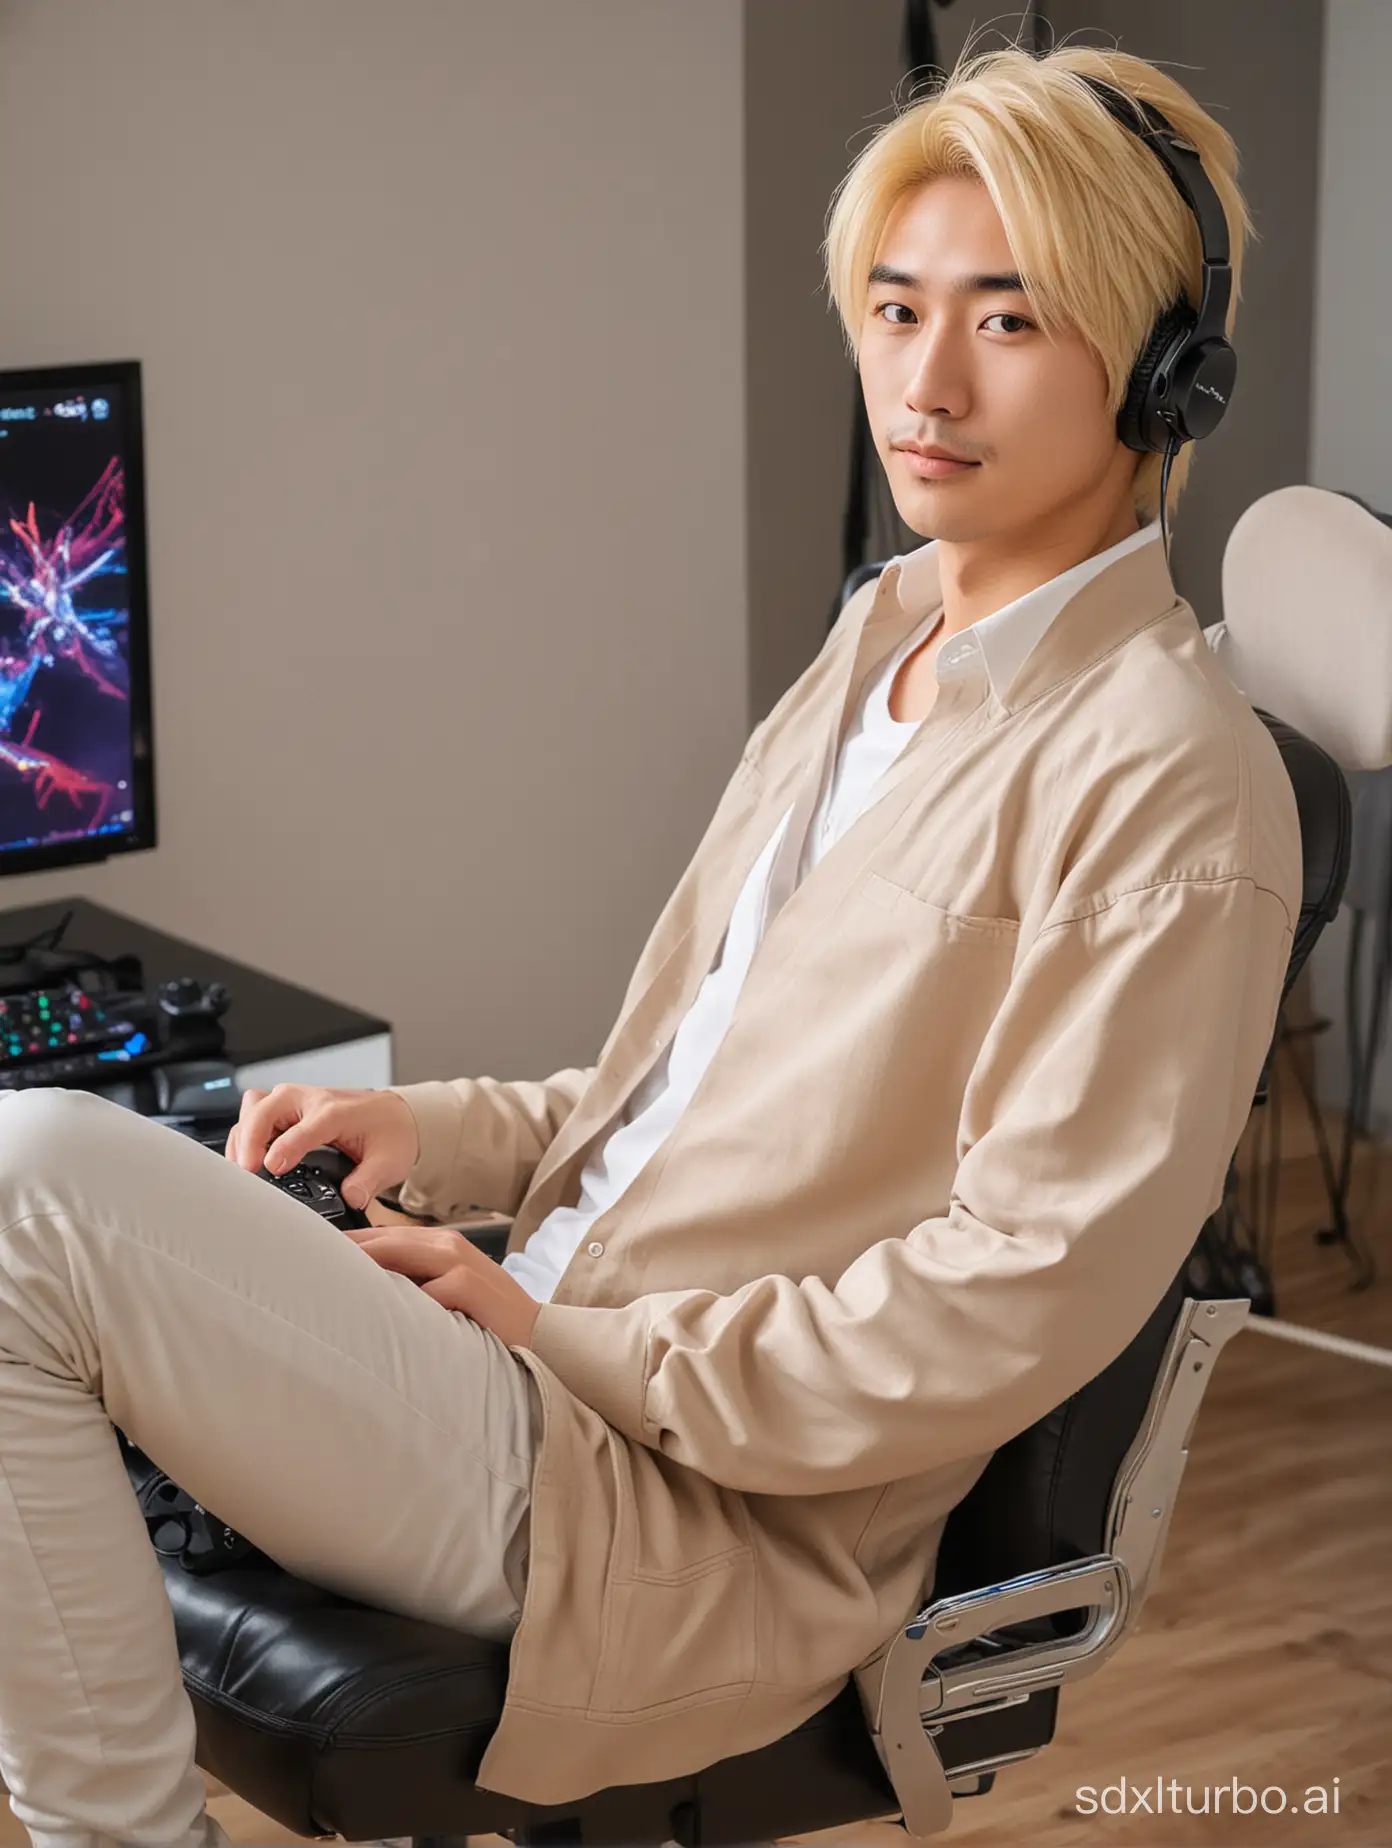 Japanese-Man-with-Blonde-Hair-Relaxing-in-Gaming-Chair